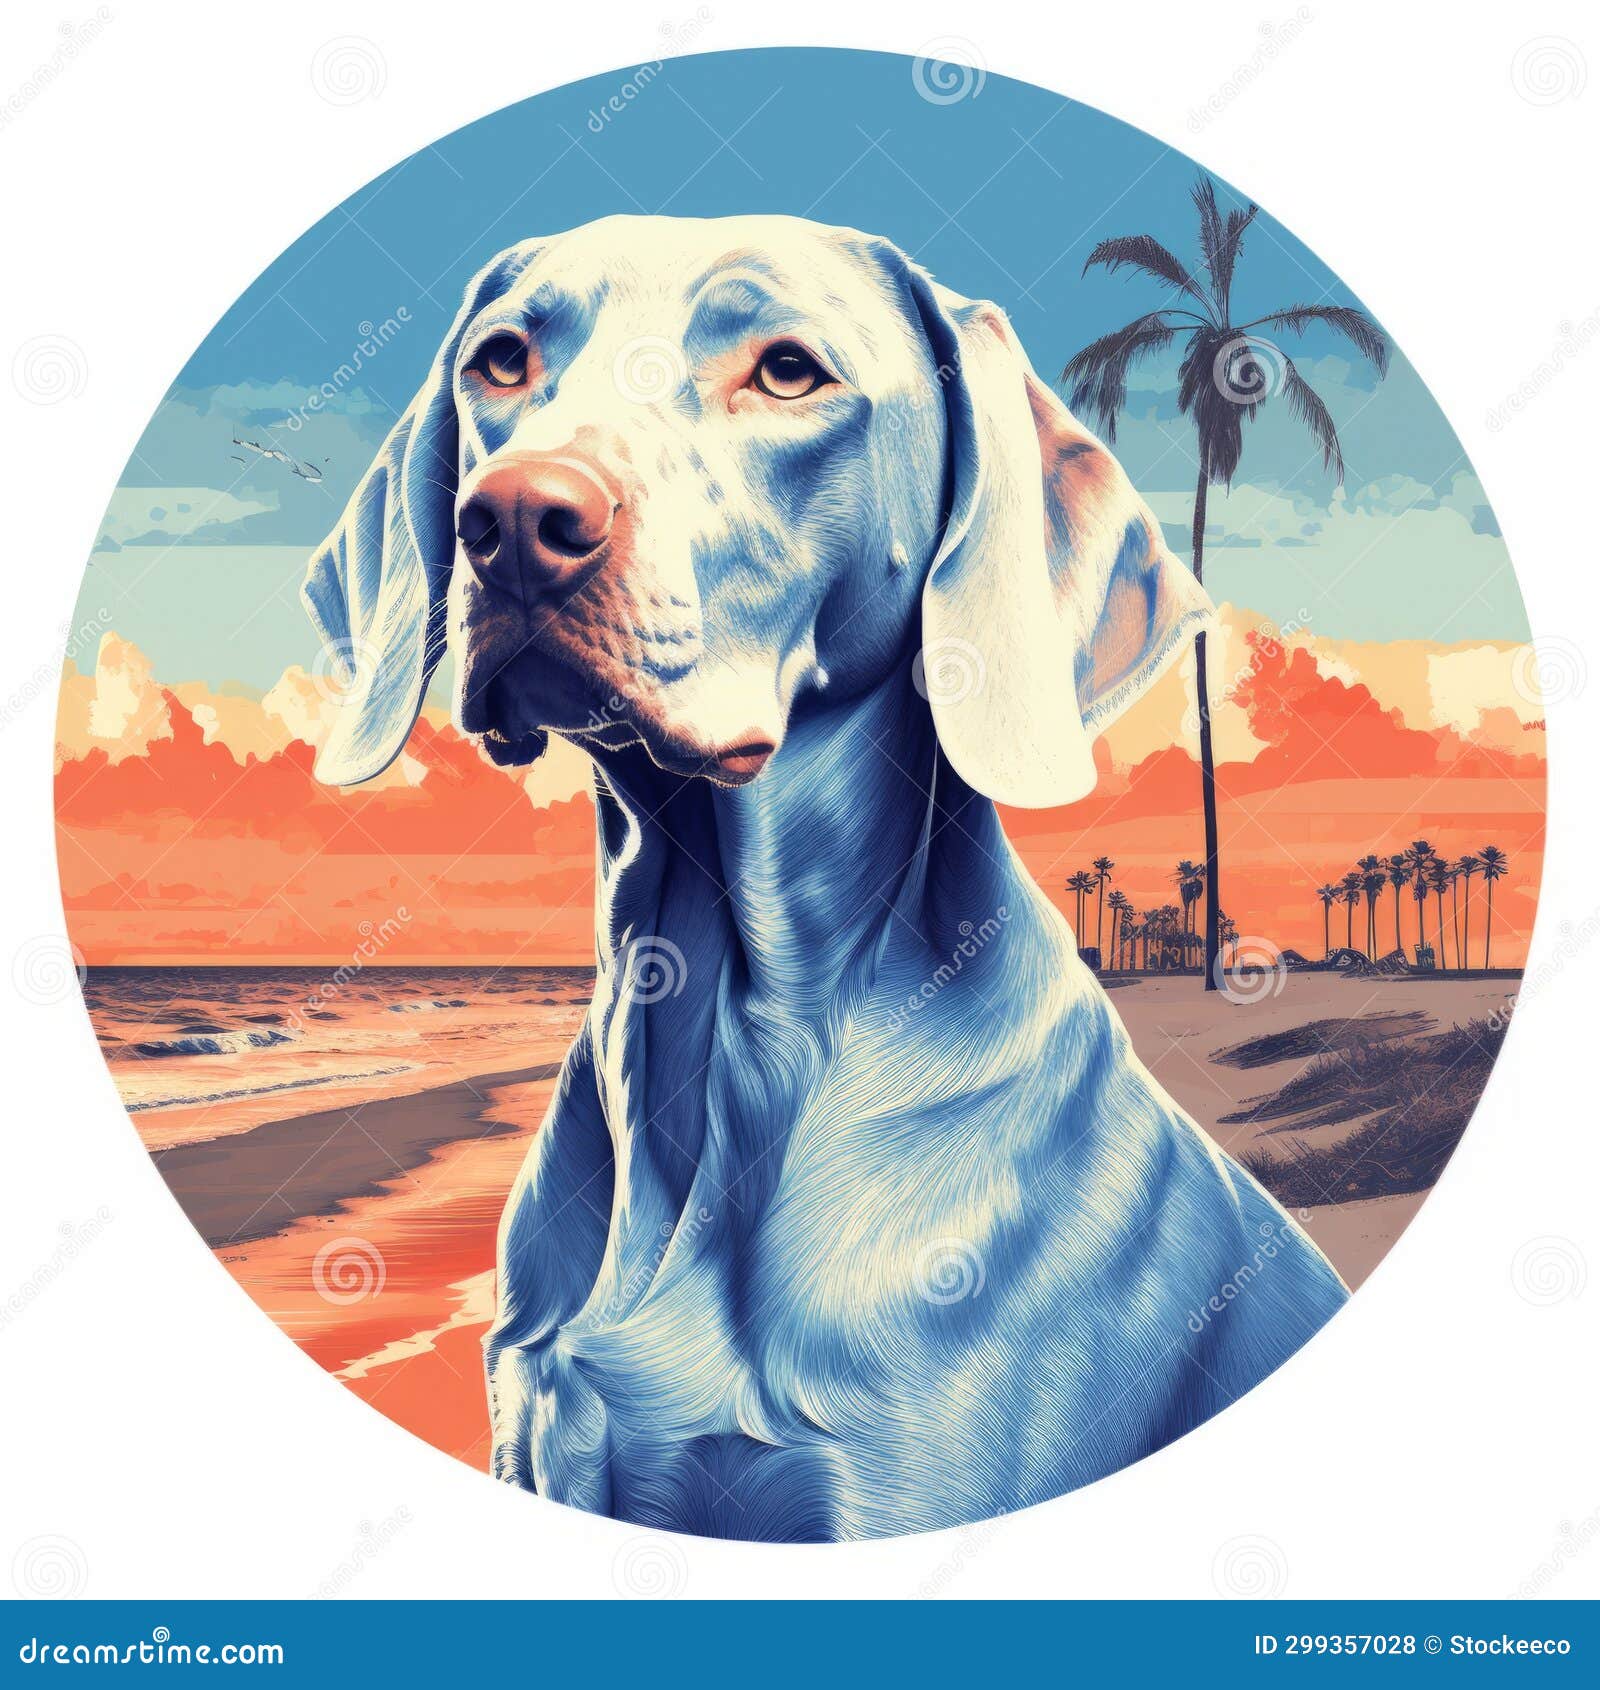 blue us herrador dog beach portrait: graphic  with richly colored skies